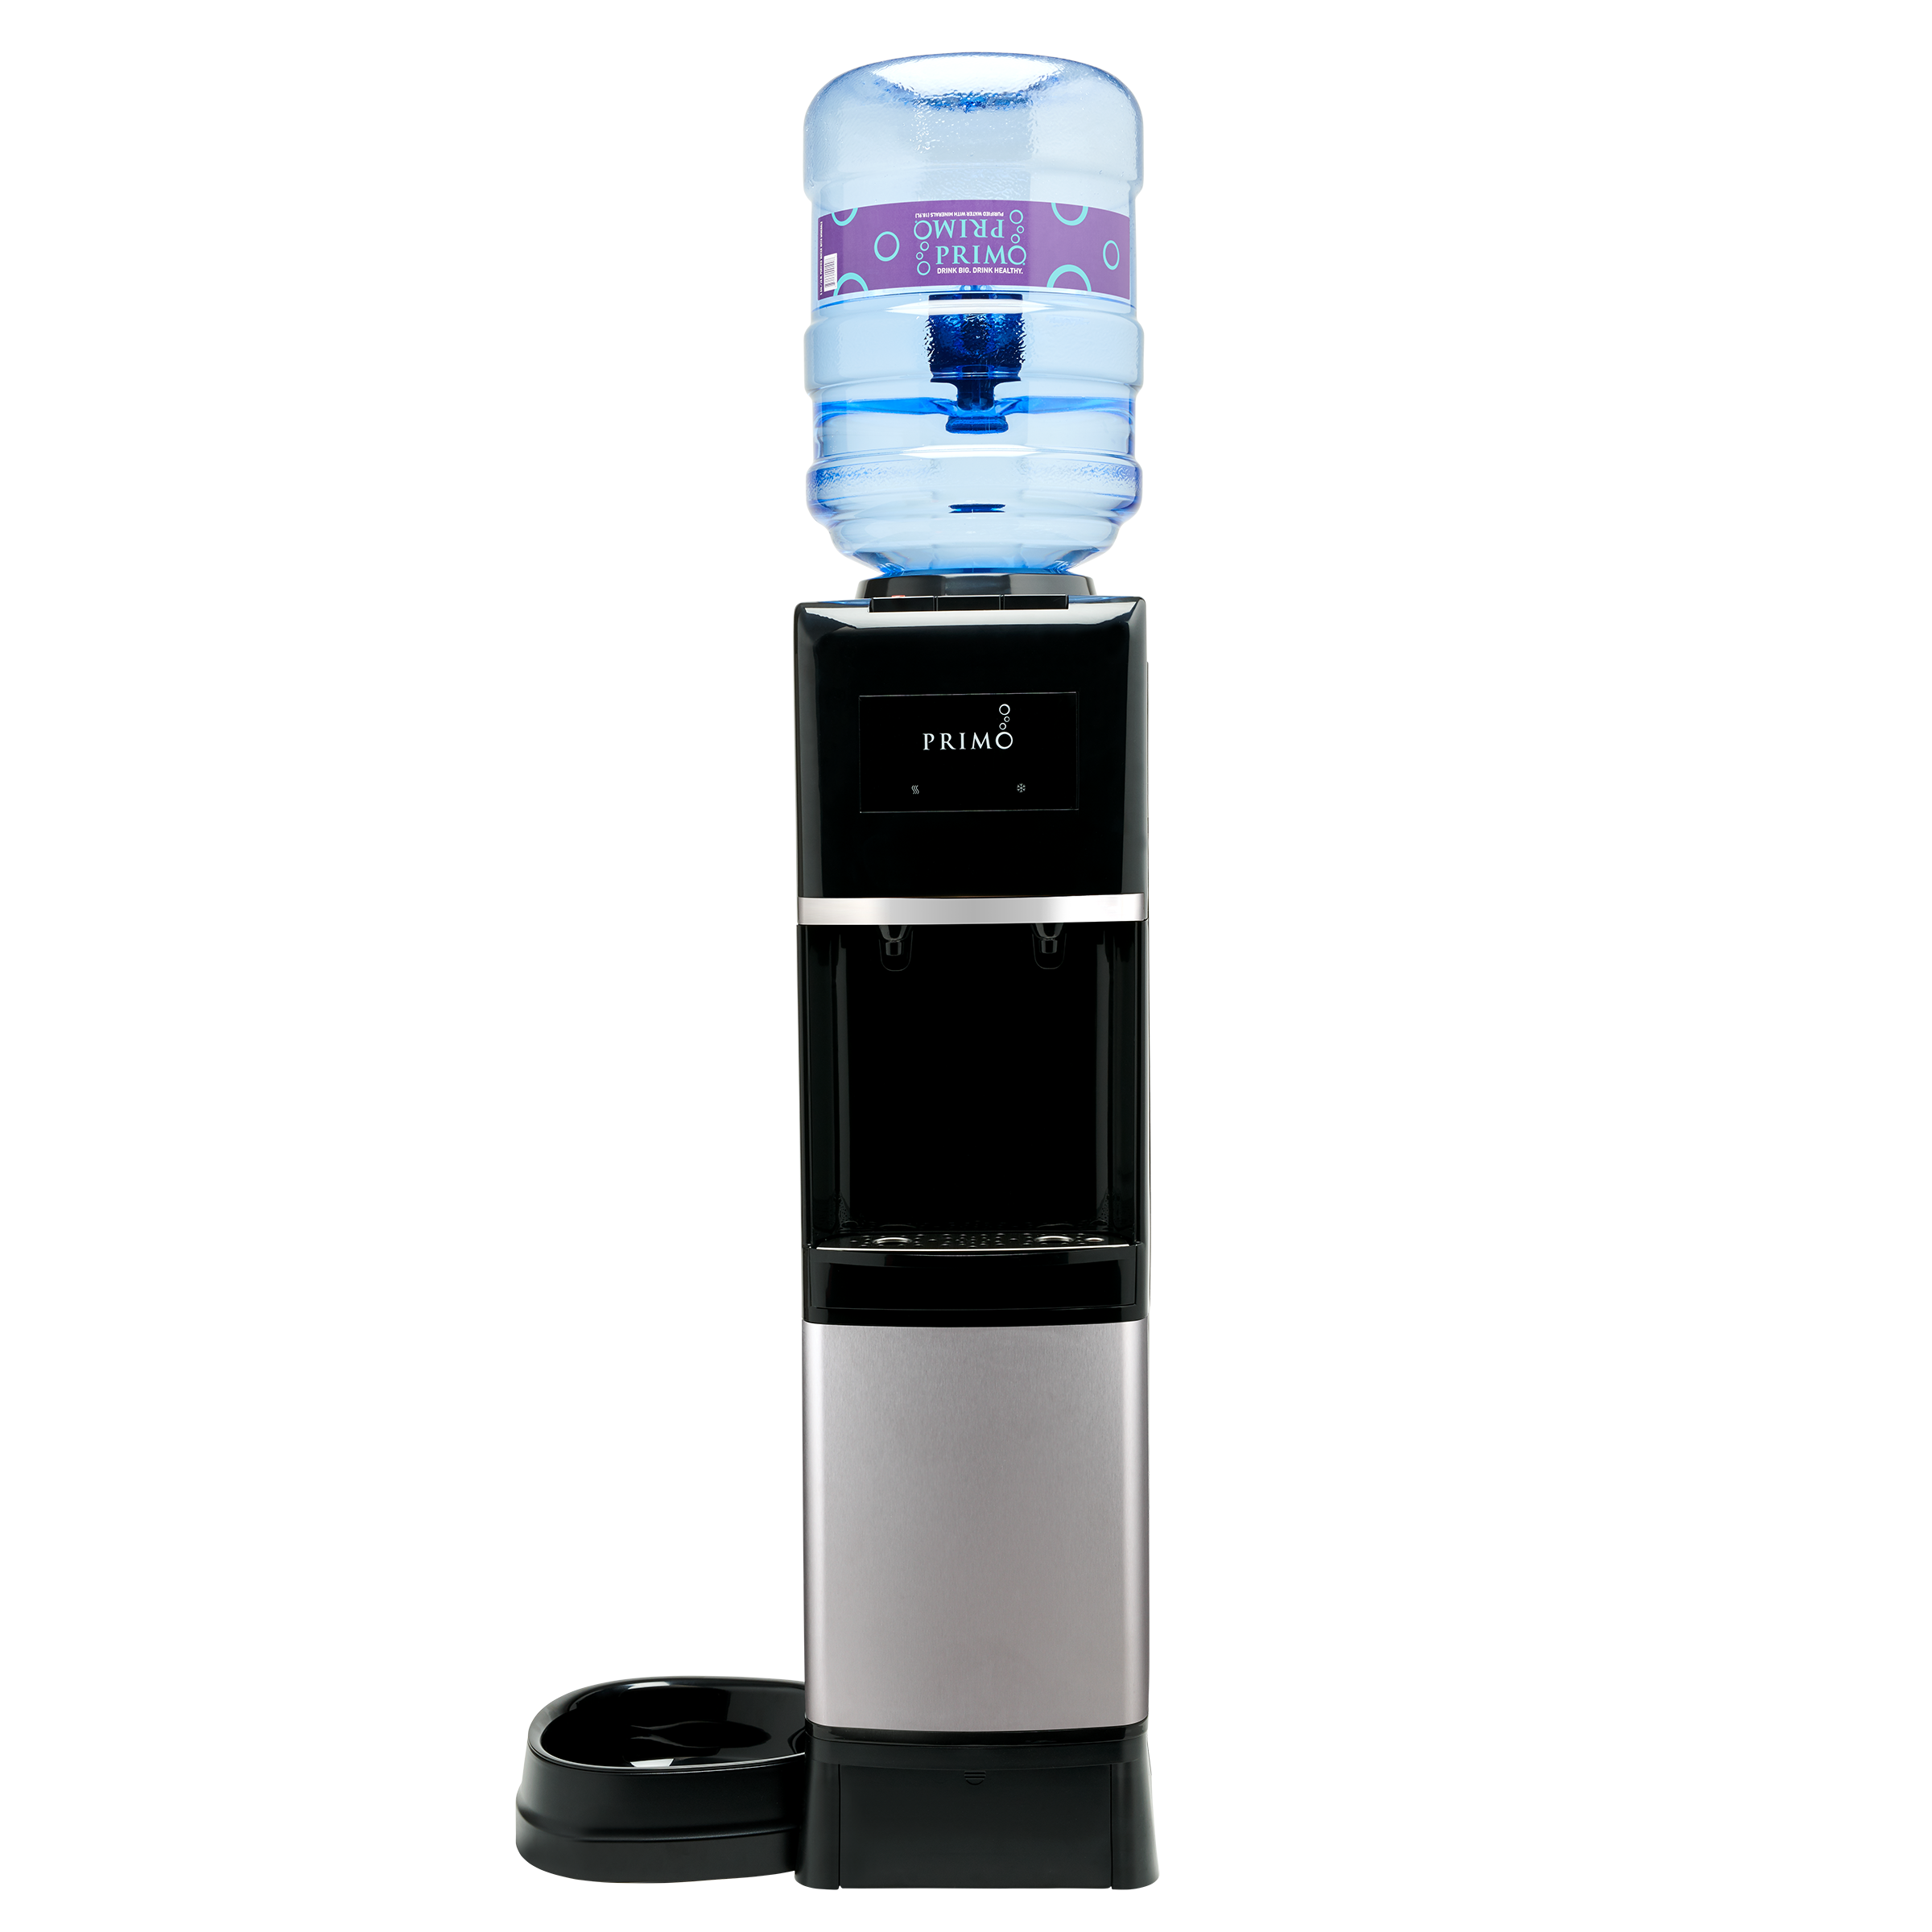 primo water dispenser not working